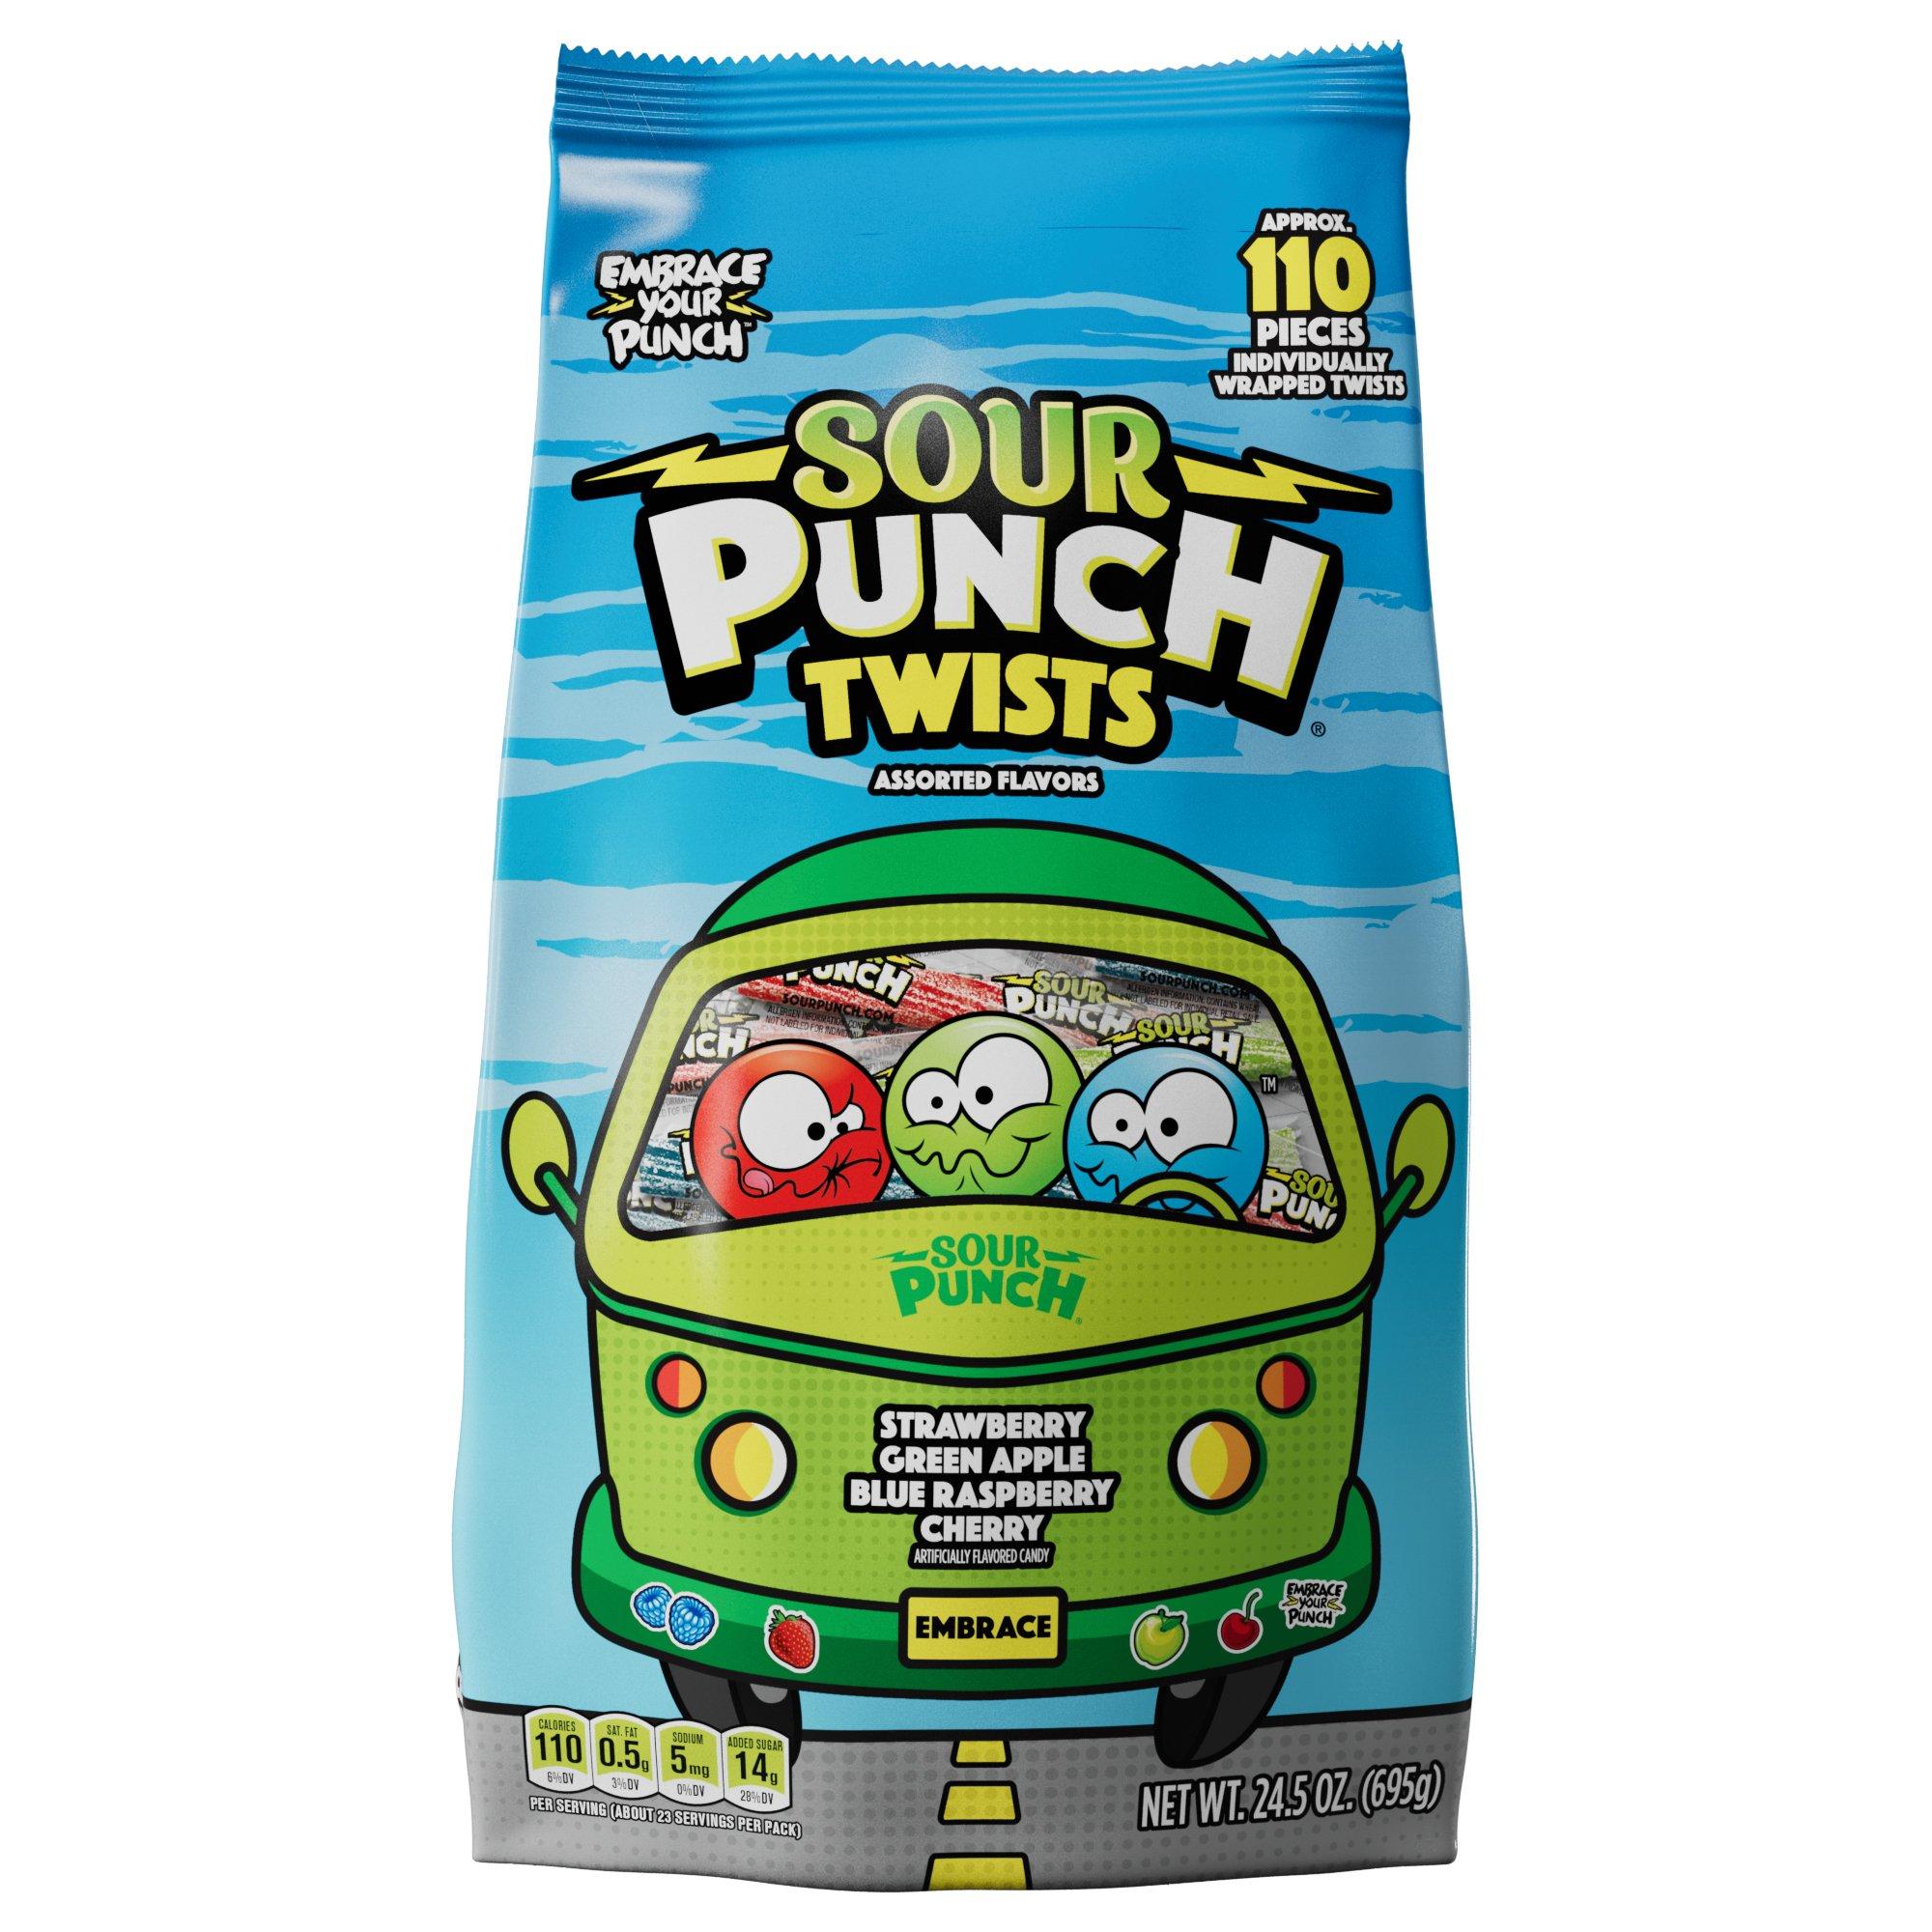 Sour Punch Twists, 110ct - Blue Raspberry, Cherry, Green Apple & Strawberry